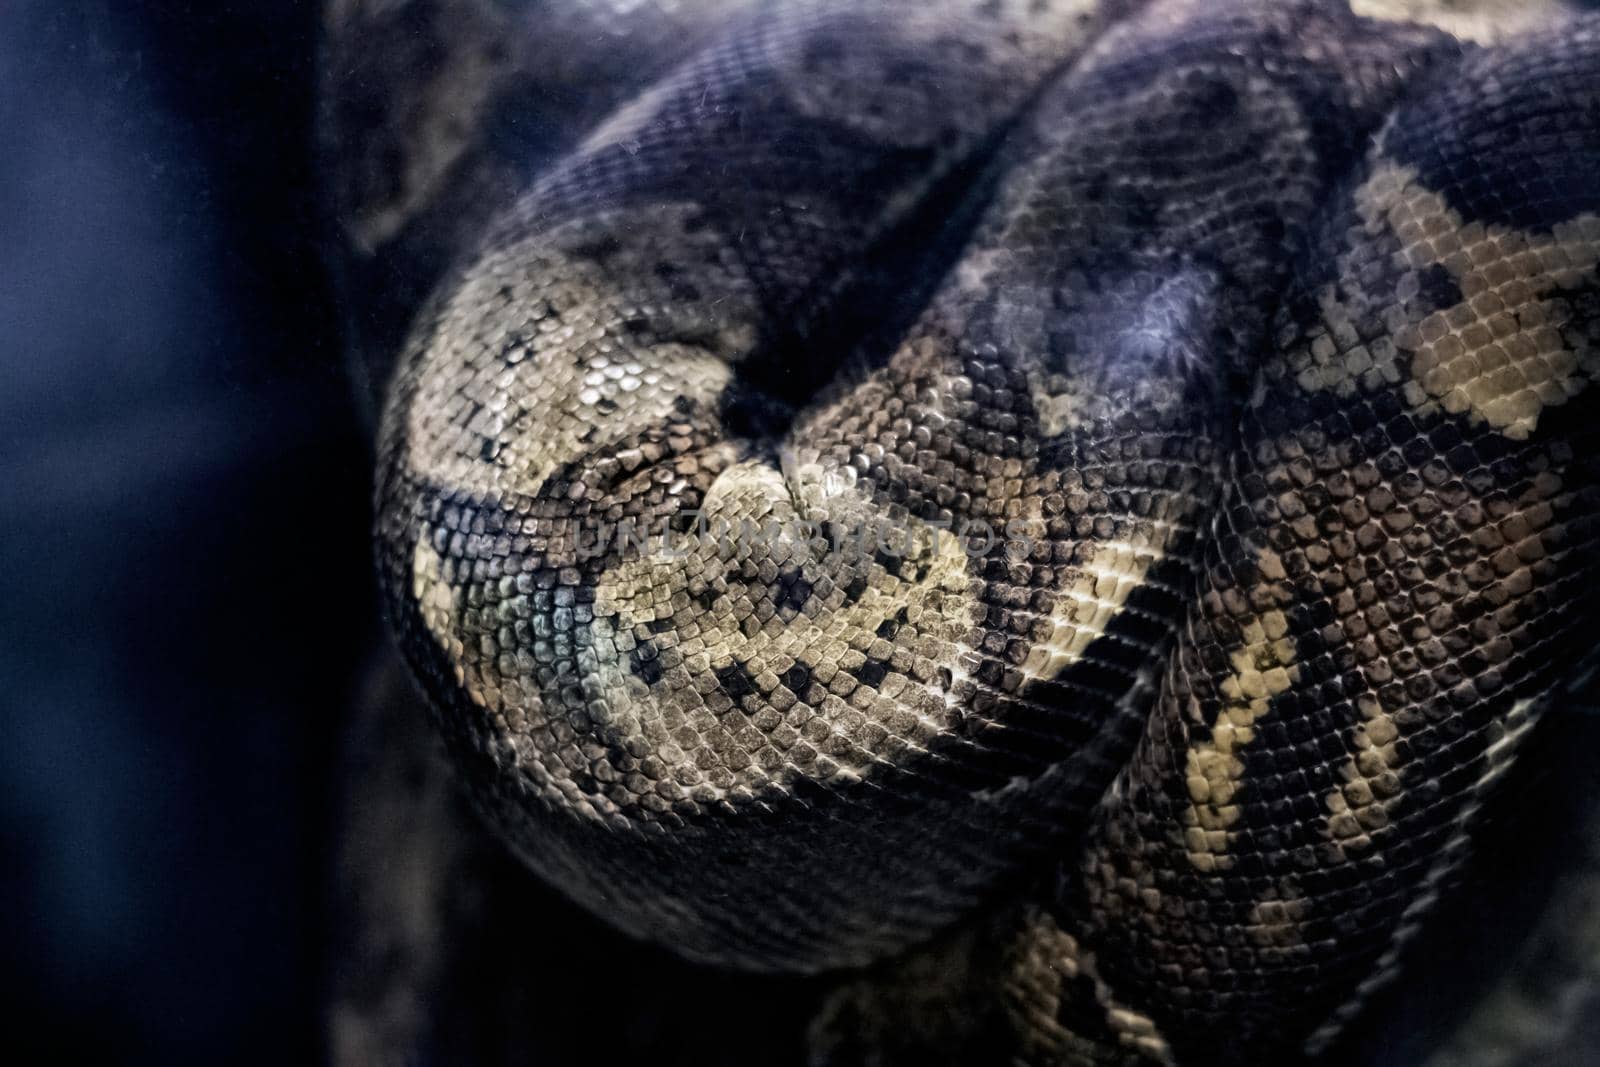 The big gray snake lies on a tree branch close up